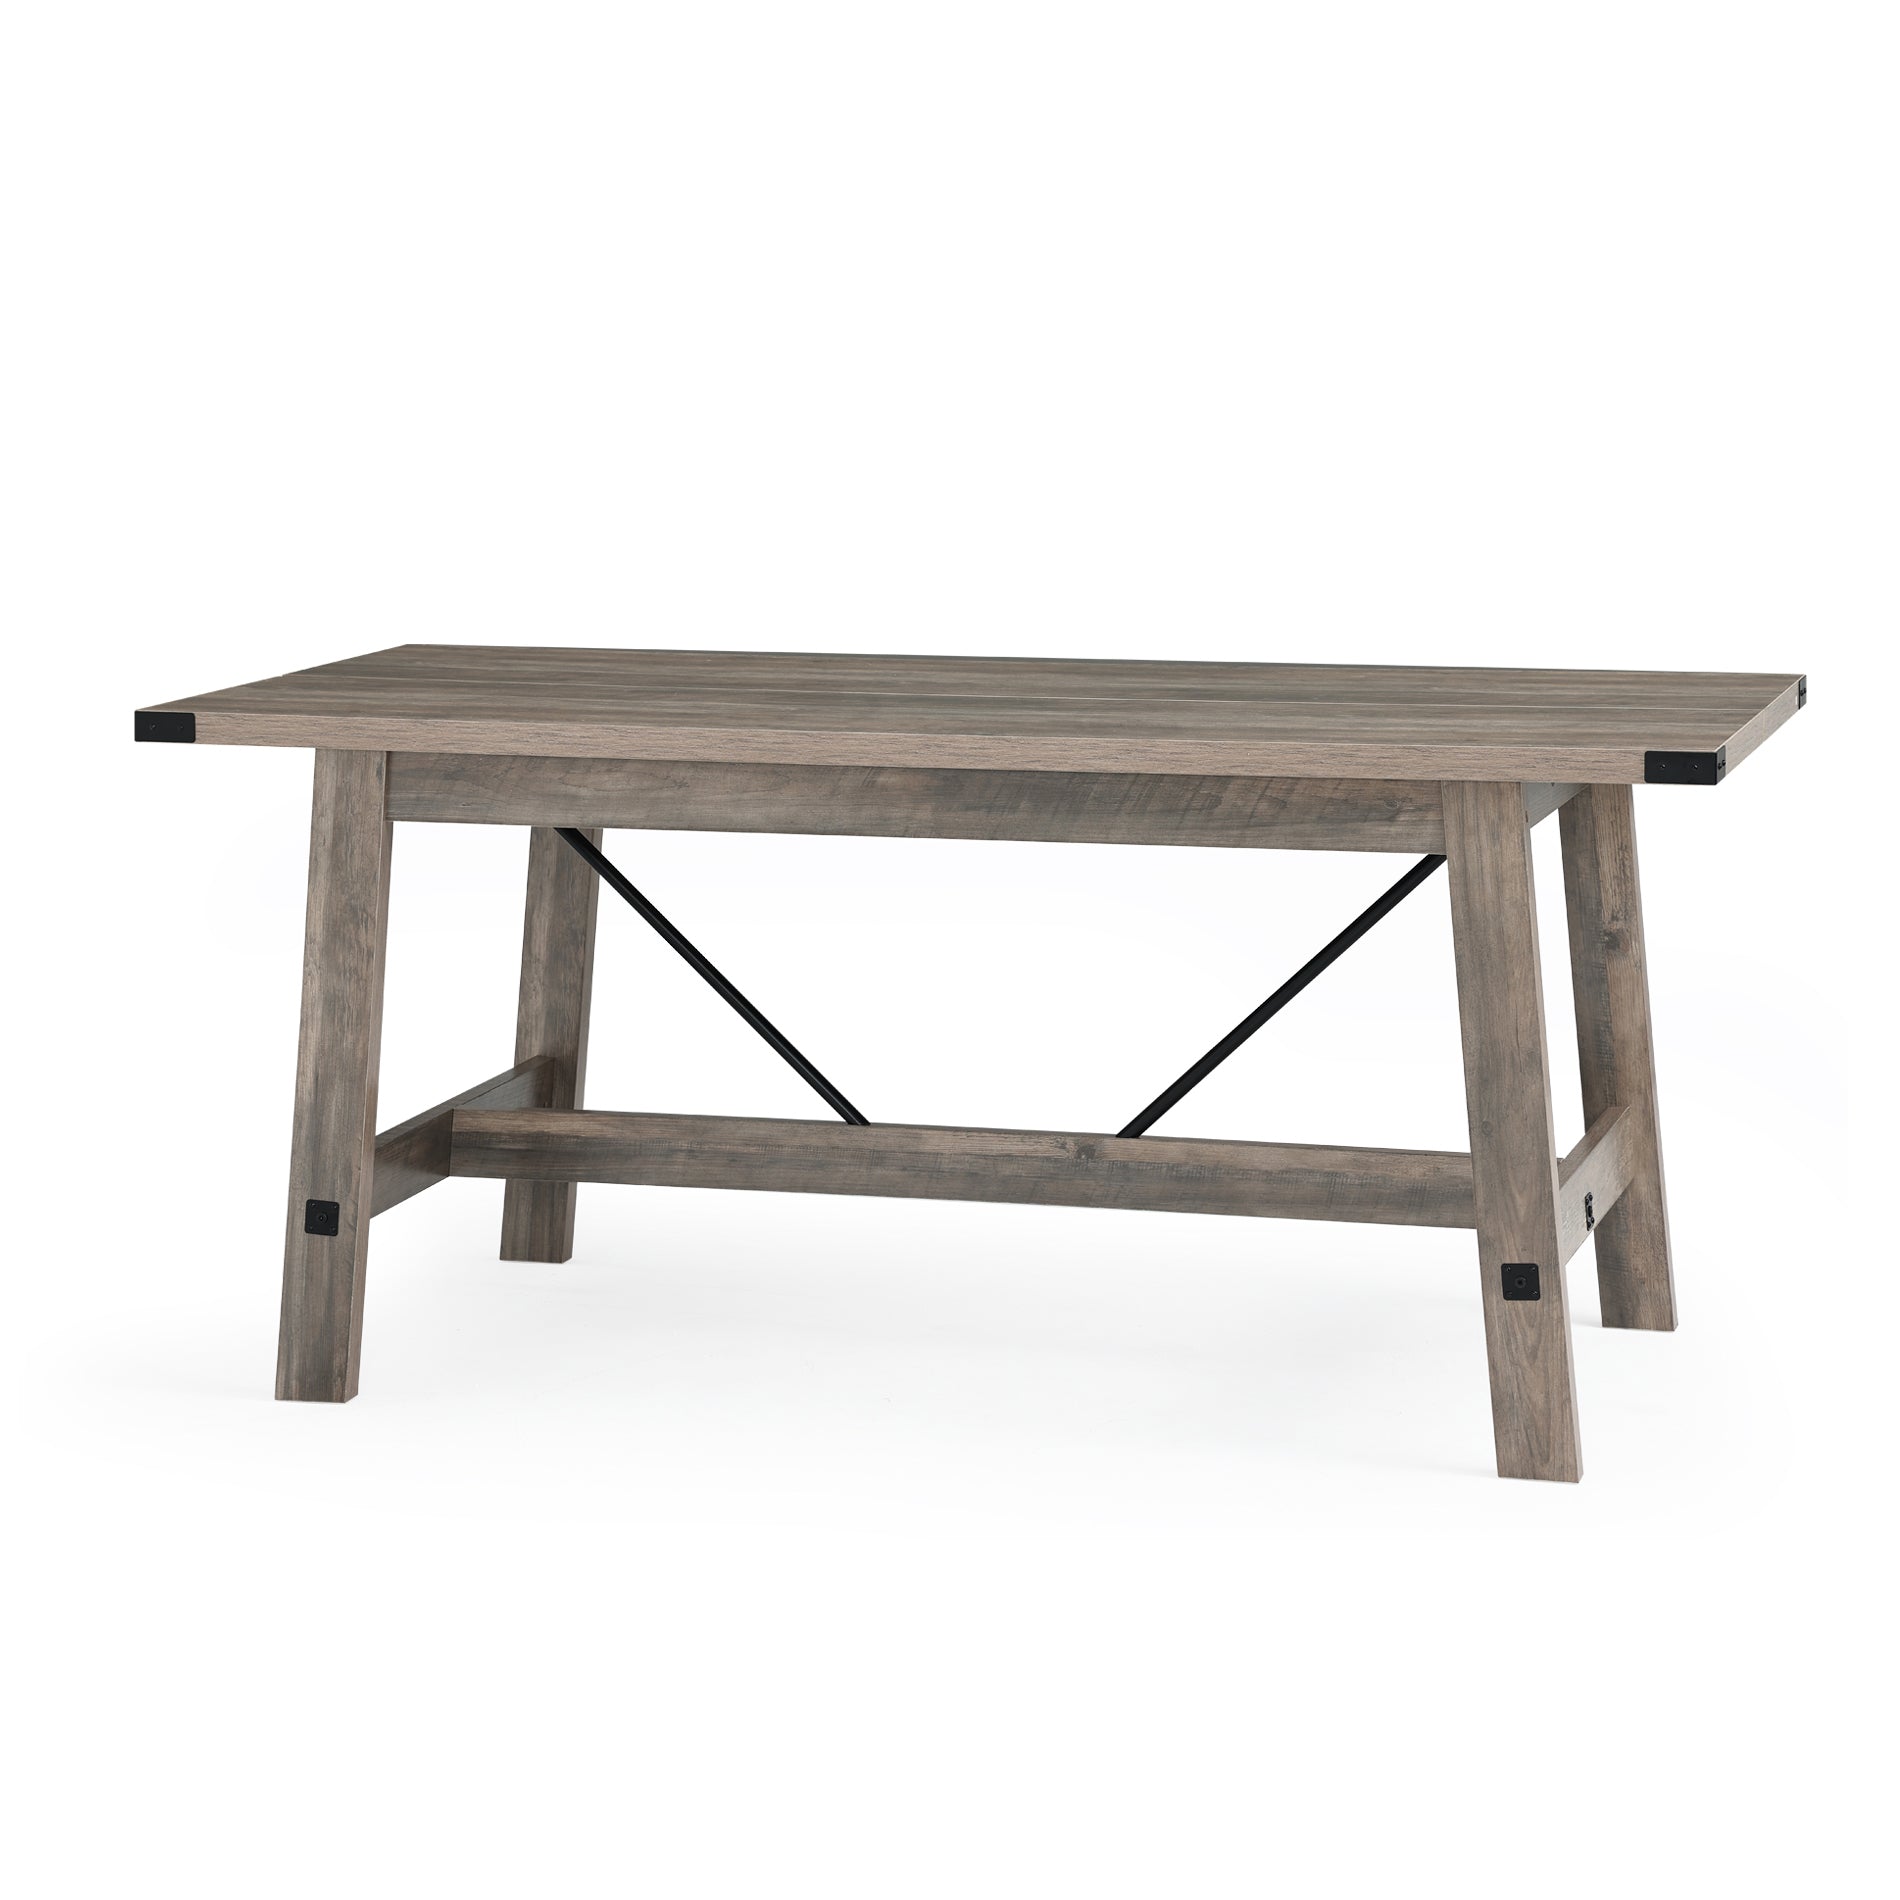 WAMPAT 67.7"  6 Person Modern Wood Dining Room Table, Rustic Grey